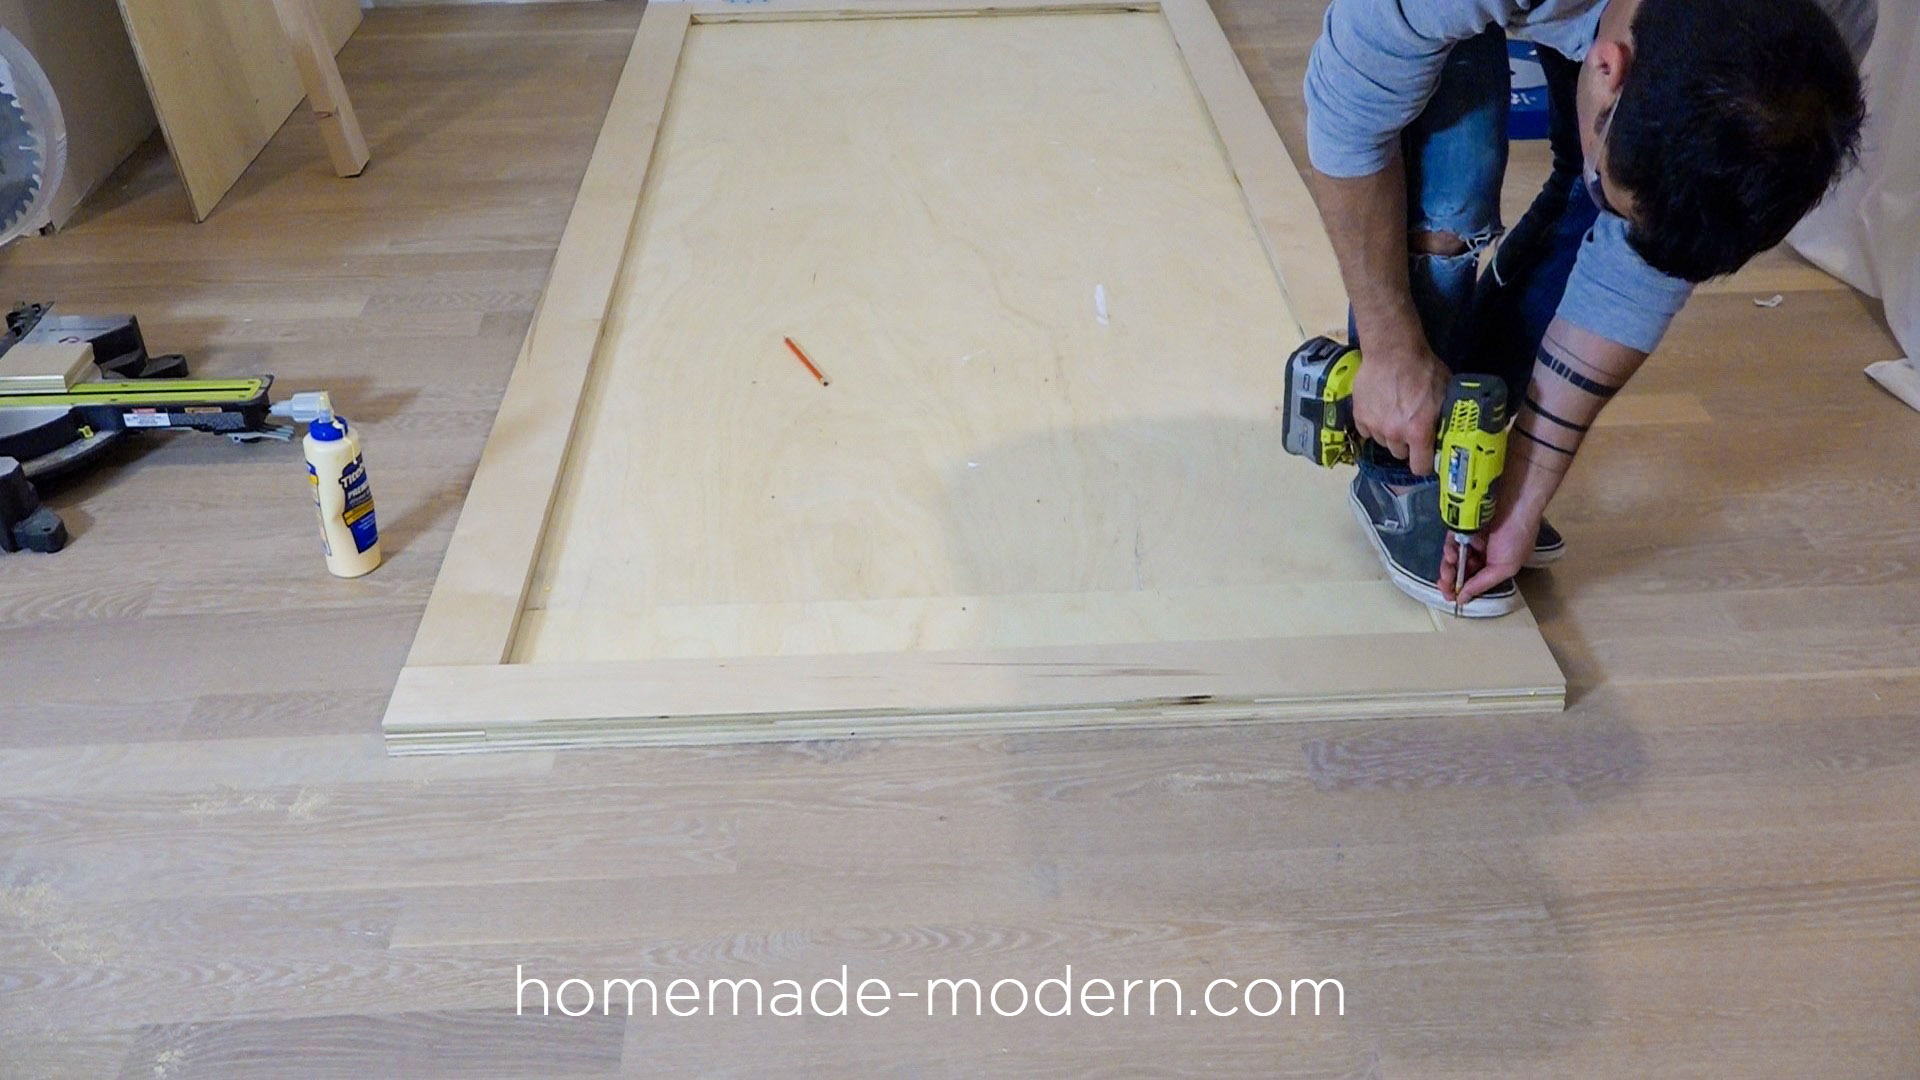 This fold-out gym is perfect for crossfit style exercise routines at home and is made from plywood. Full instructions can be found at HomeMade-Modern.com